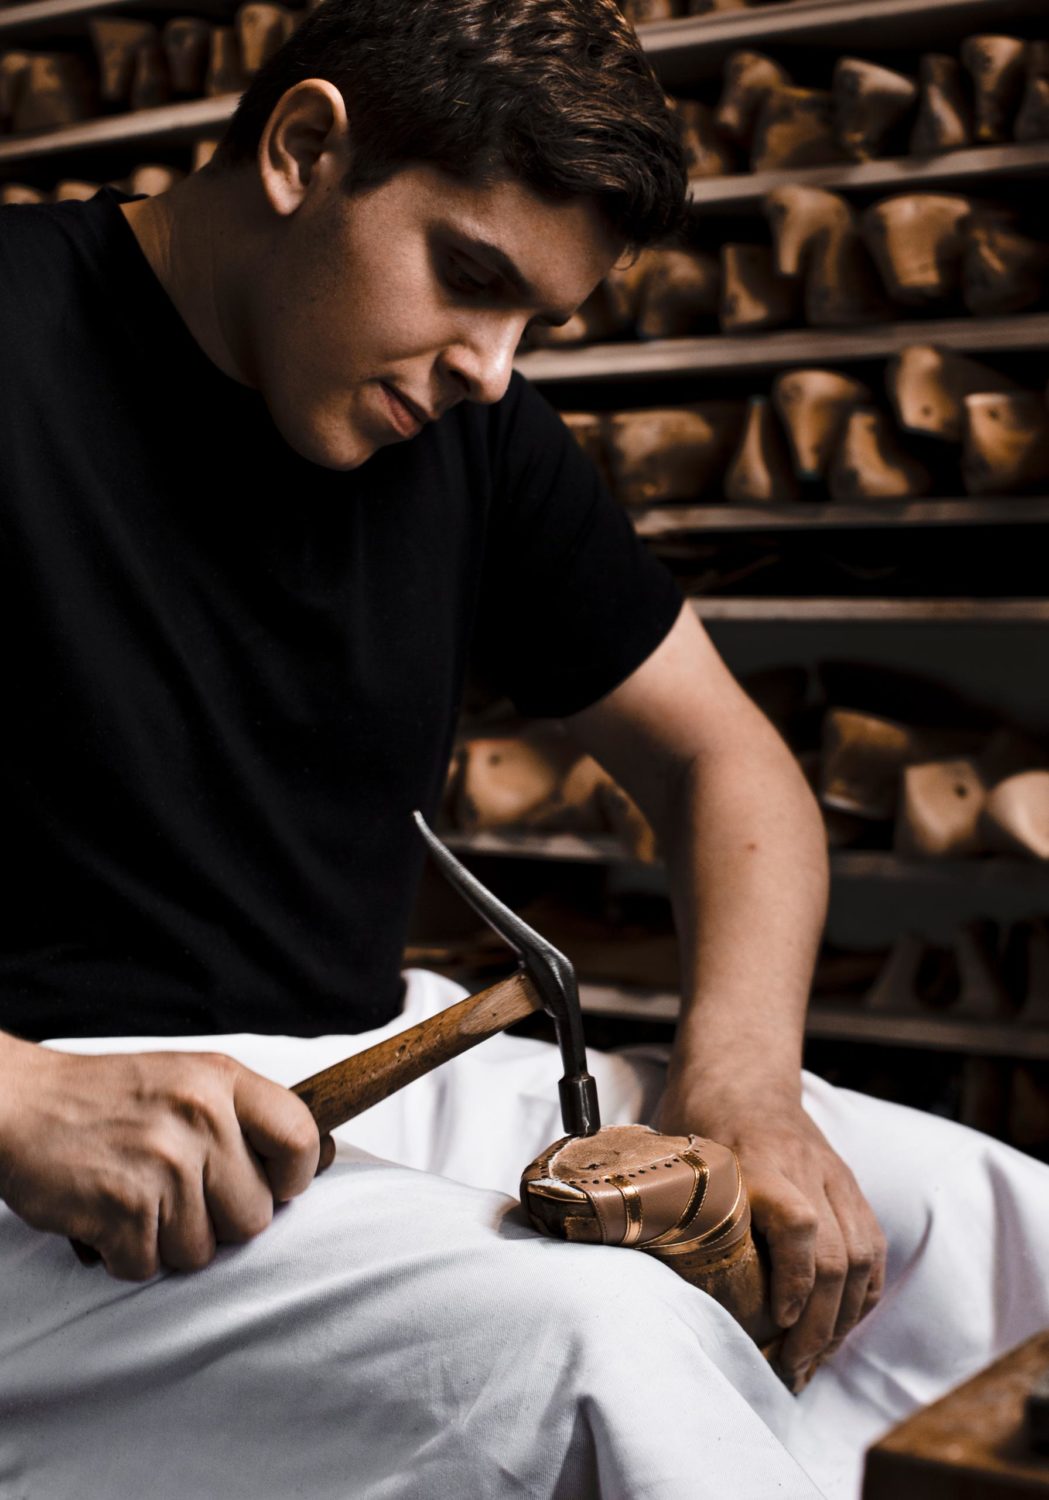 Young Ambassador: Arthur Veillon Working at Maison Clairvoy Year: 2019 Craft by material: Leather Craft by field: Fashion & Accessories Craft by metier: Shoemaker, shoemaking